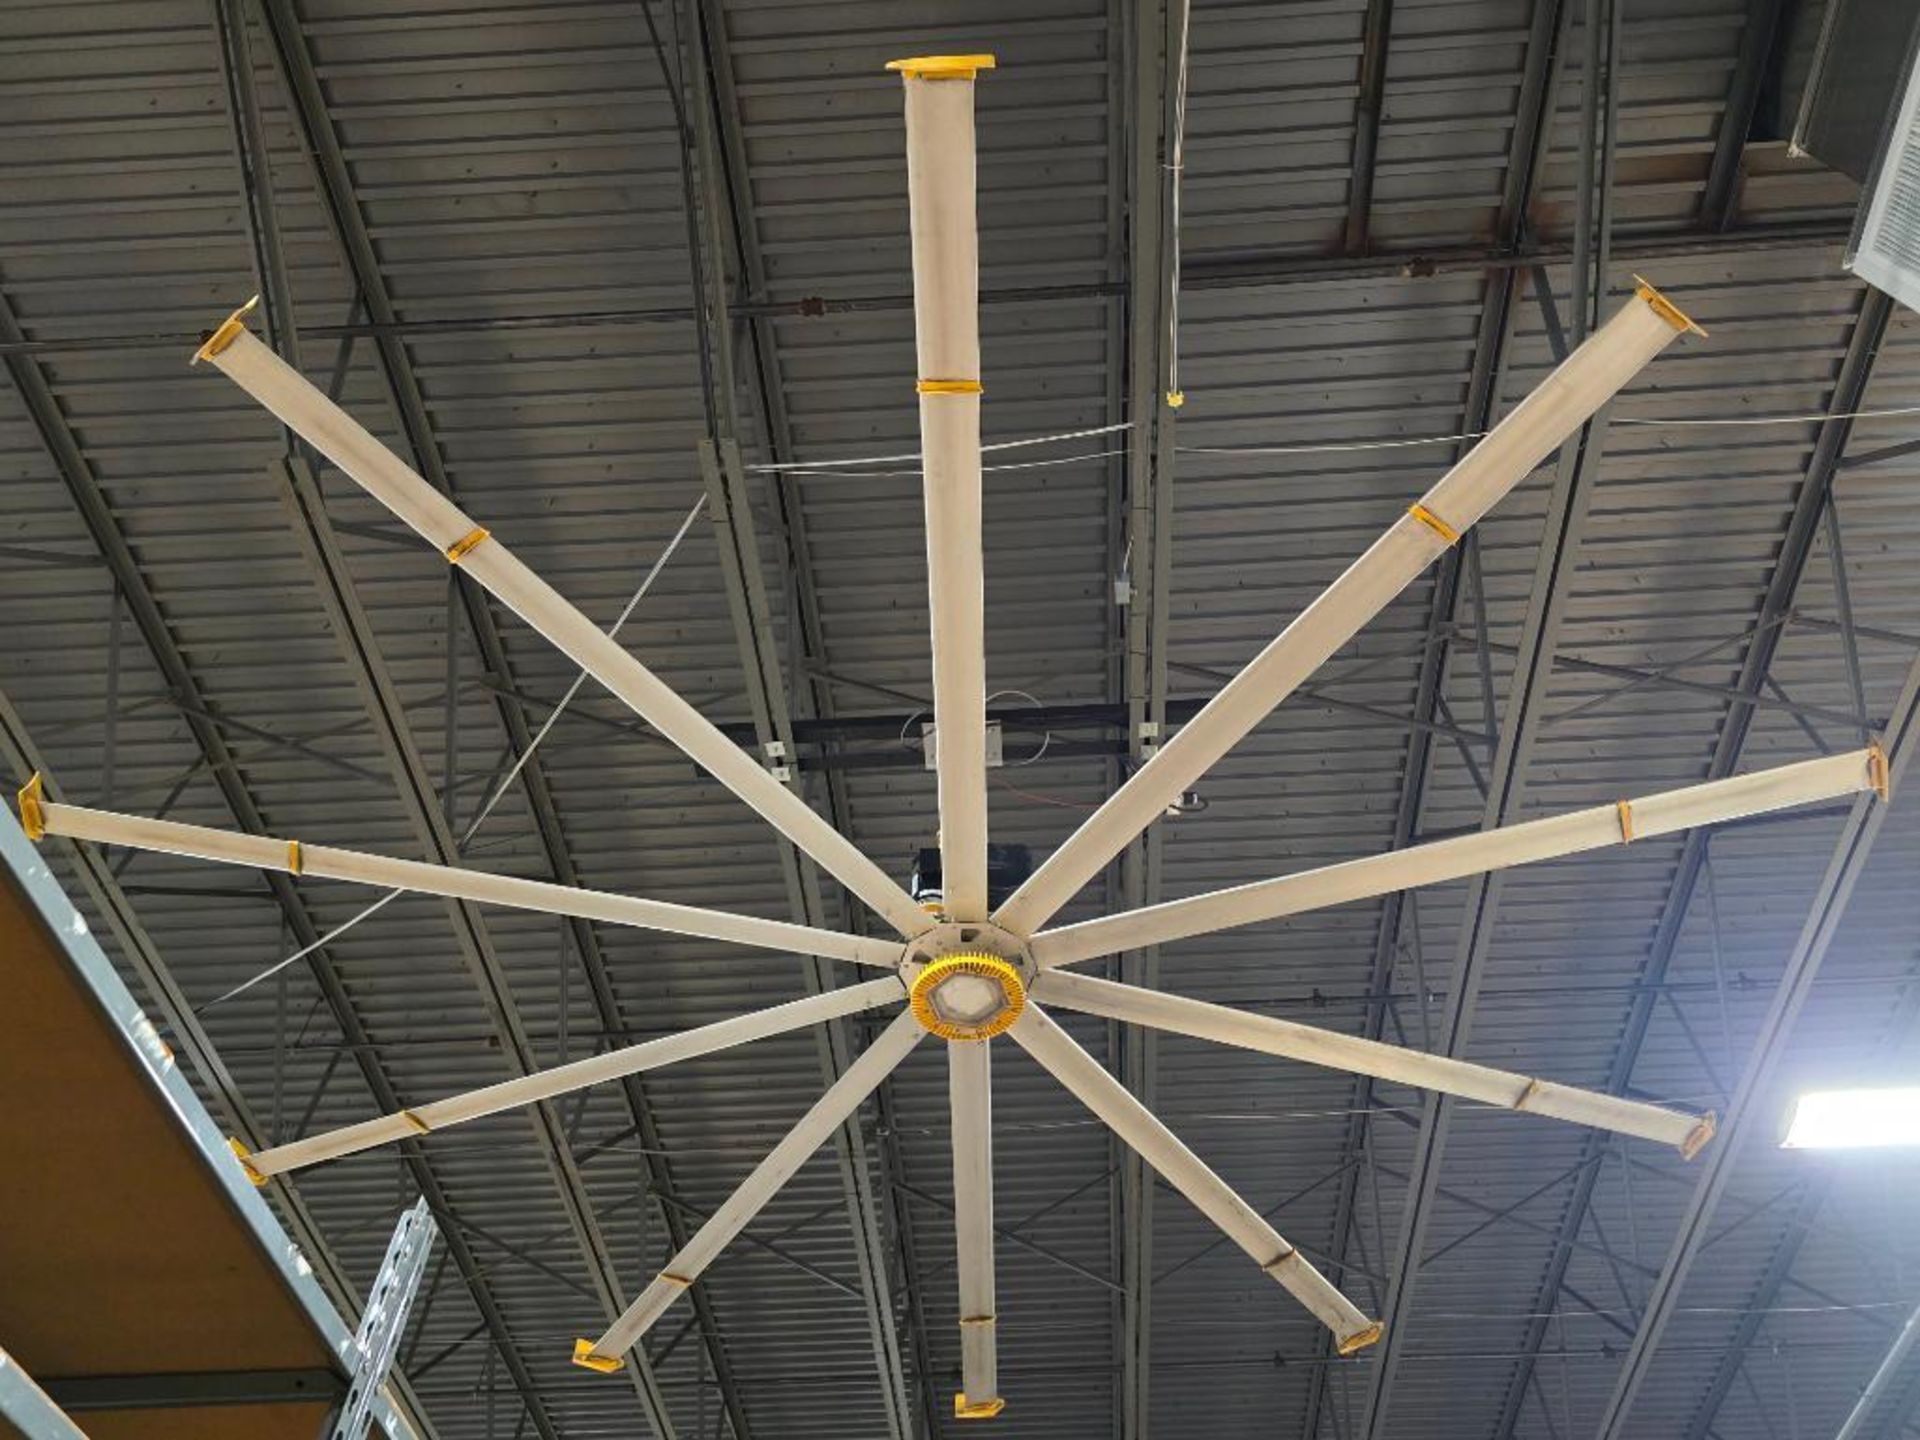 Big Ass Fan 18' Powerfoil 3.0 Industrial Ceiling Fans, Variable Speed, 10-Blade System, 2 HP - Image 6 of 8